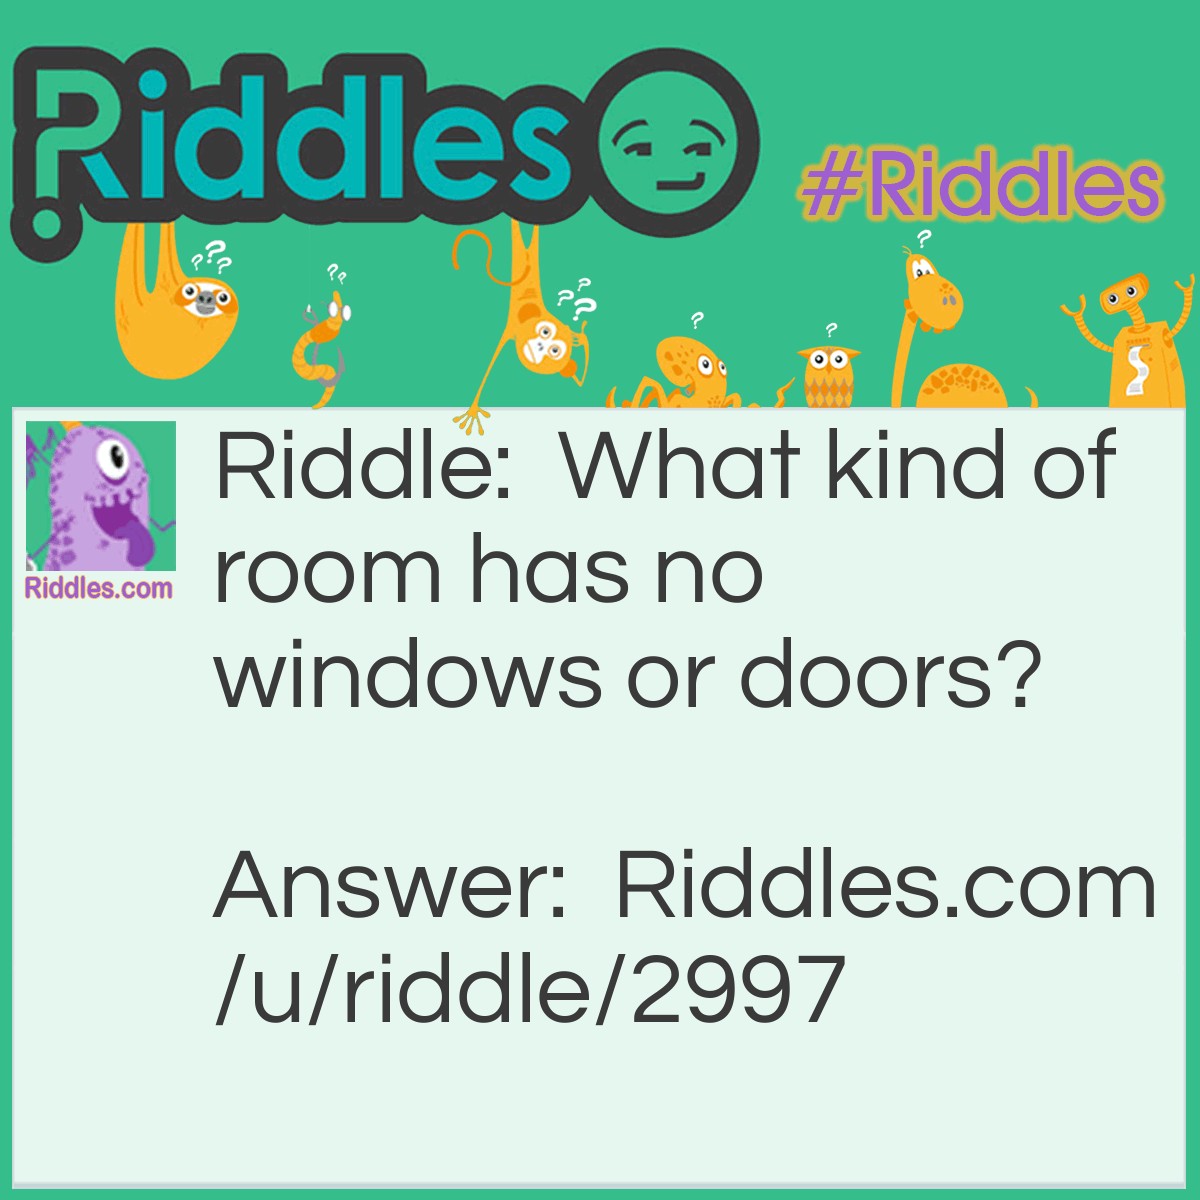 Riddle: What kind of room has no windows or doors? Answer: A closed room.